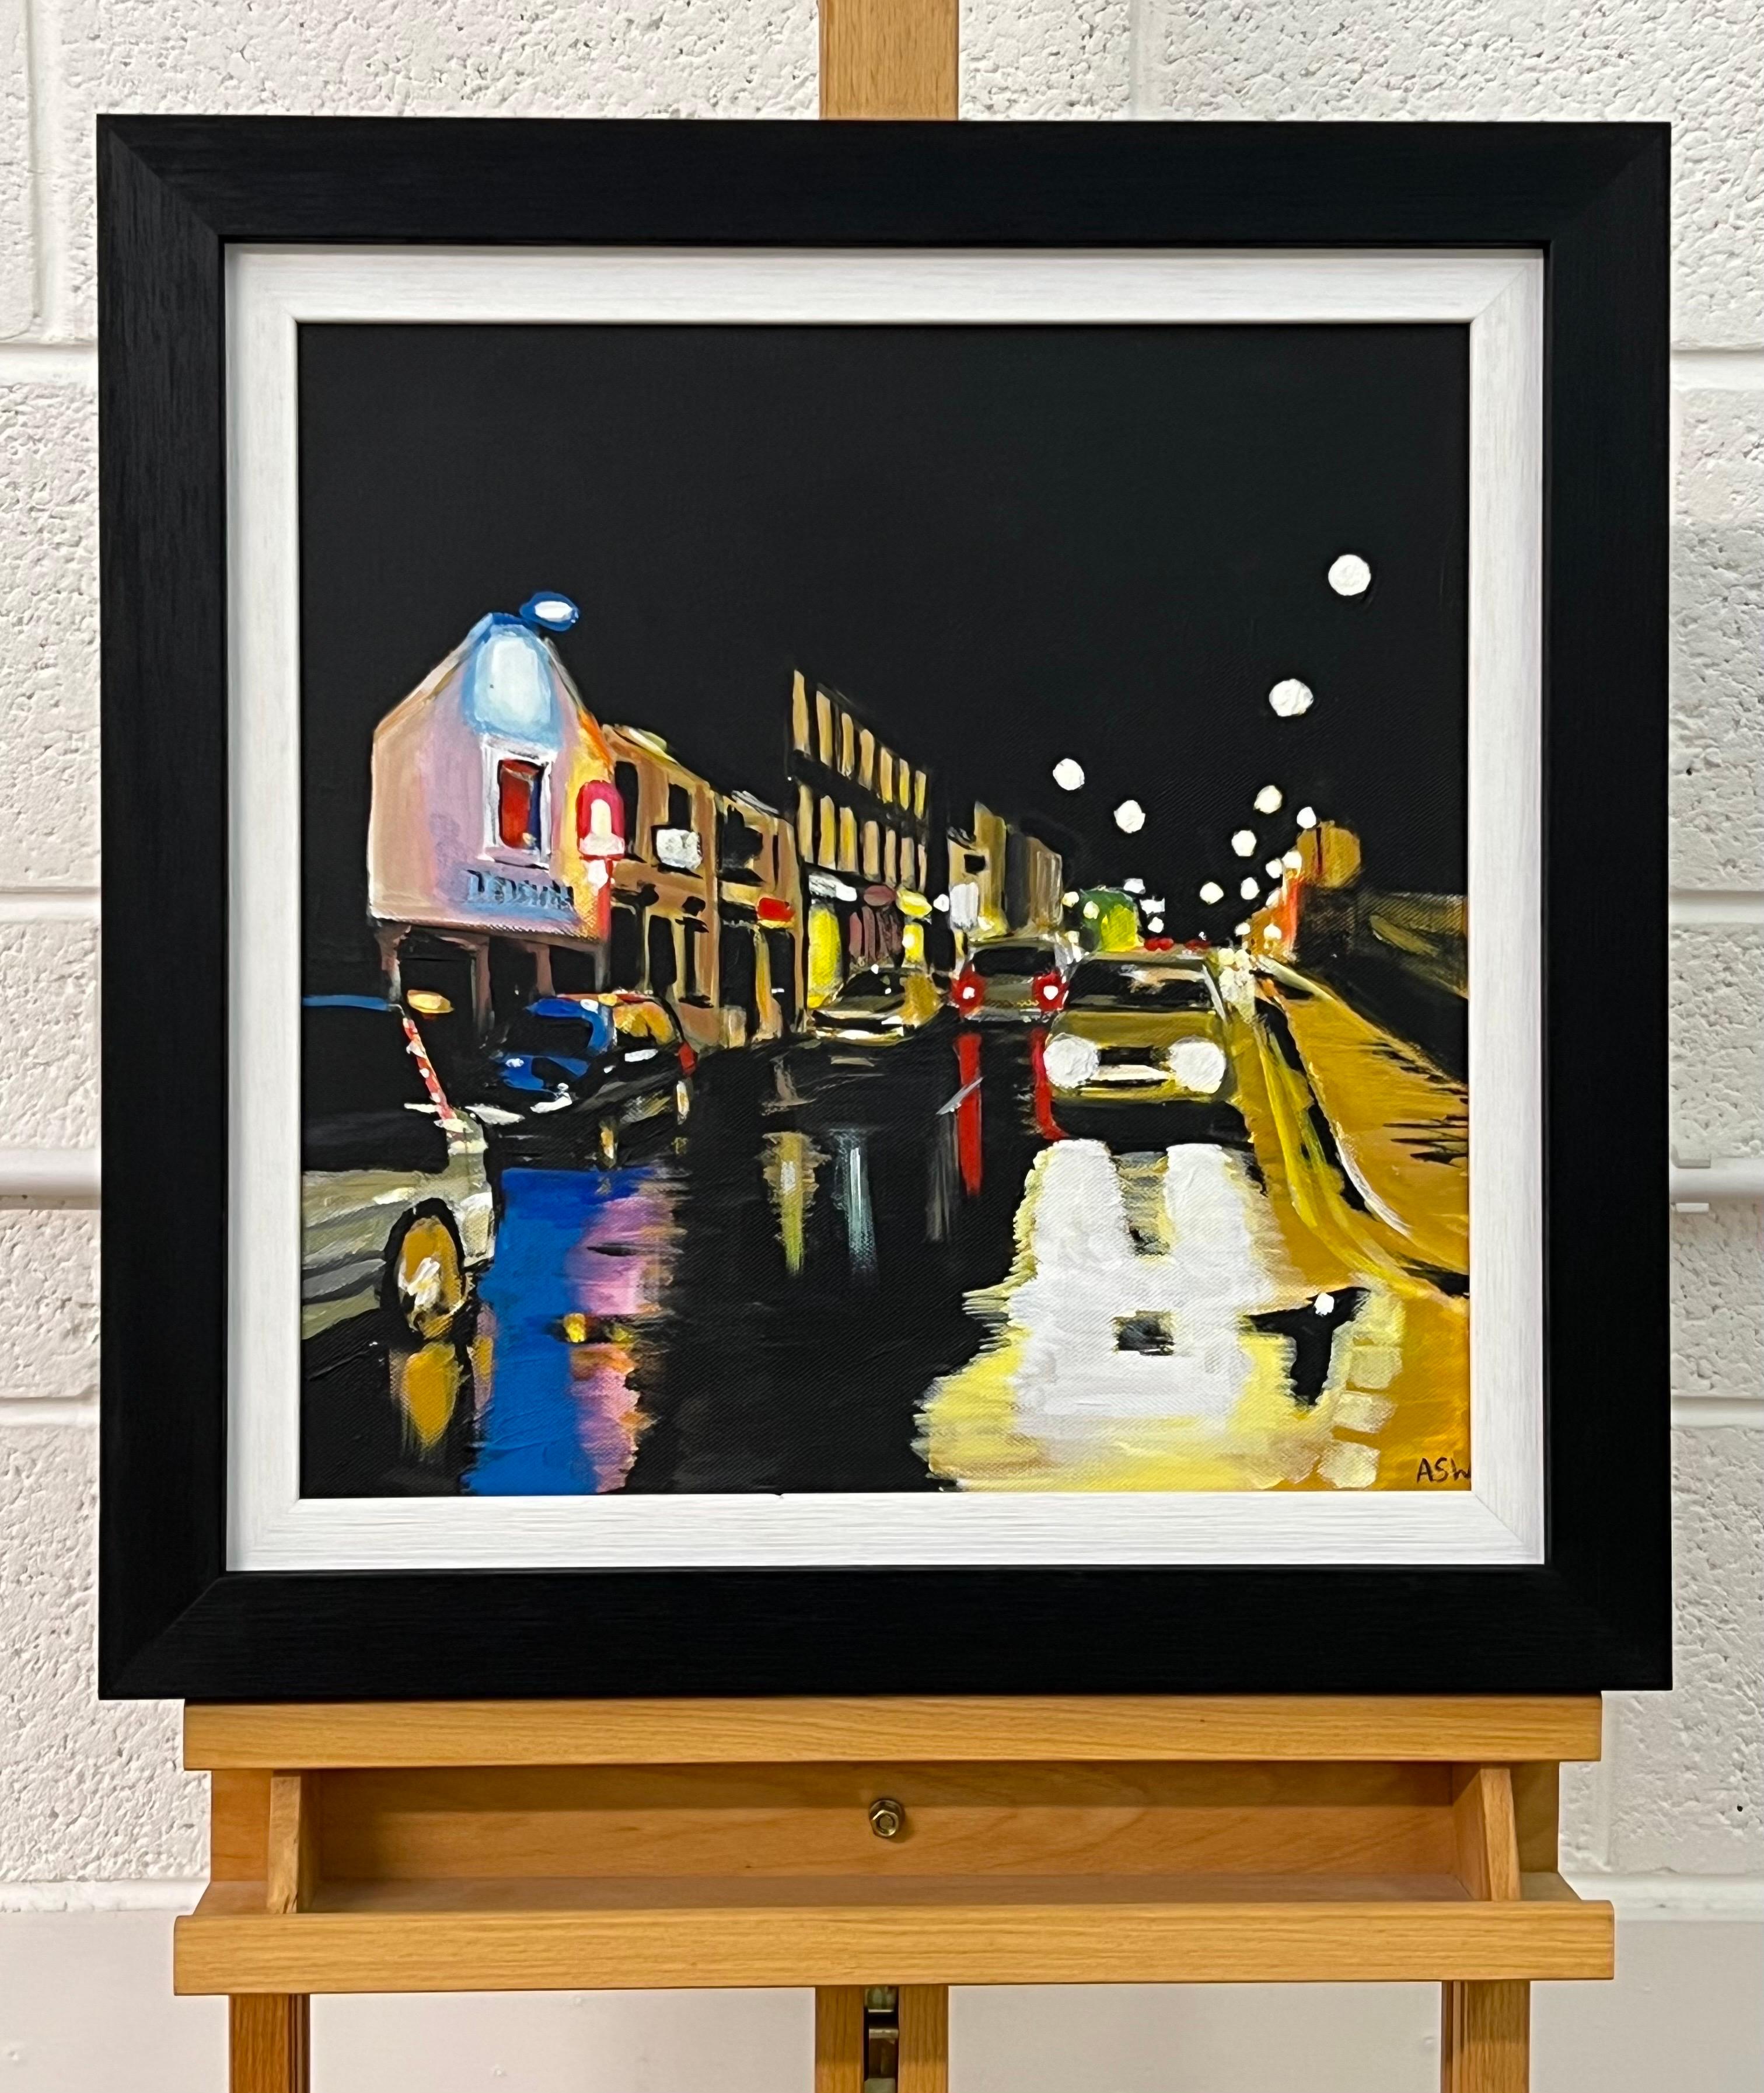 Painting of a Northern English Village in Winter by Leading Contemporary British Urban Landscape Artist, Angela Wakefield. The painting depicts an urban landscape scene from the village of Whalley in Lancashire on a typically rainy evening. 

Art